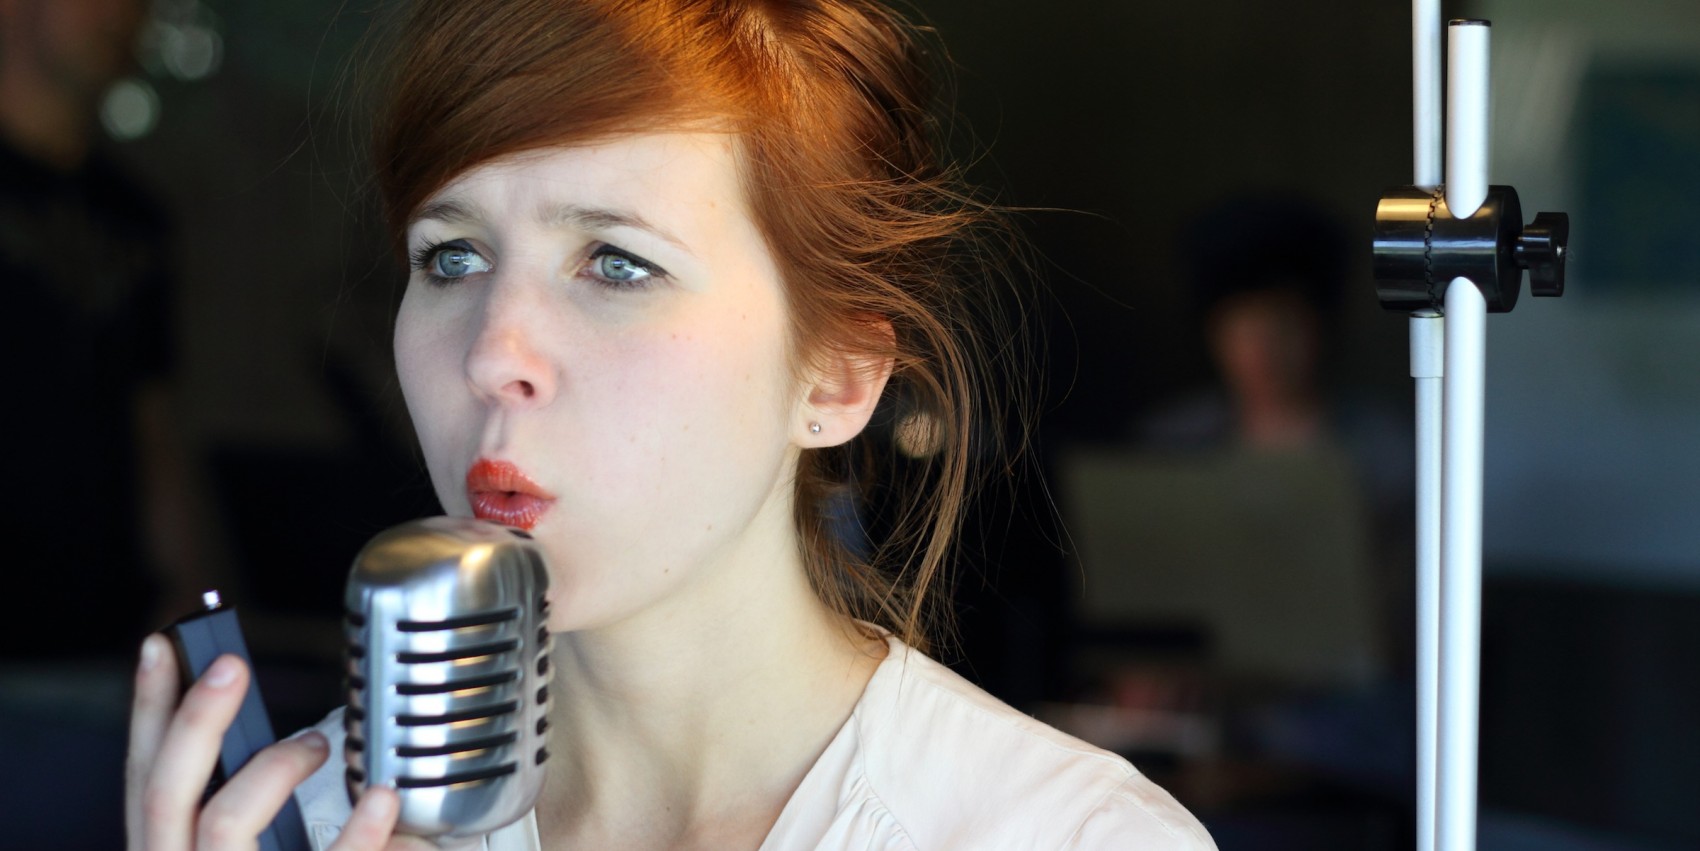 A woman sings, mouth pursed, into a silver microphone